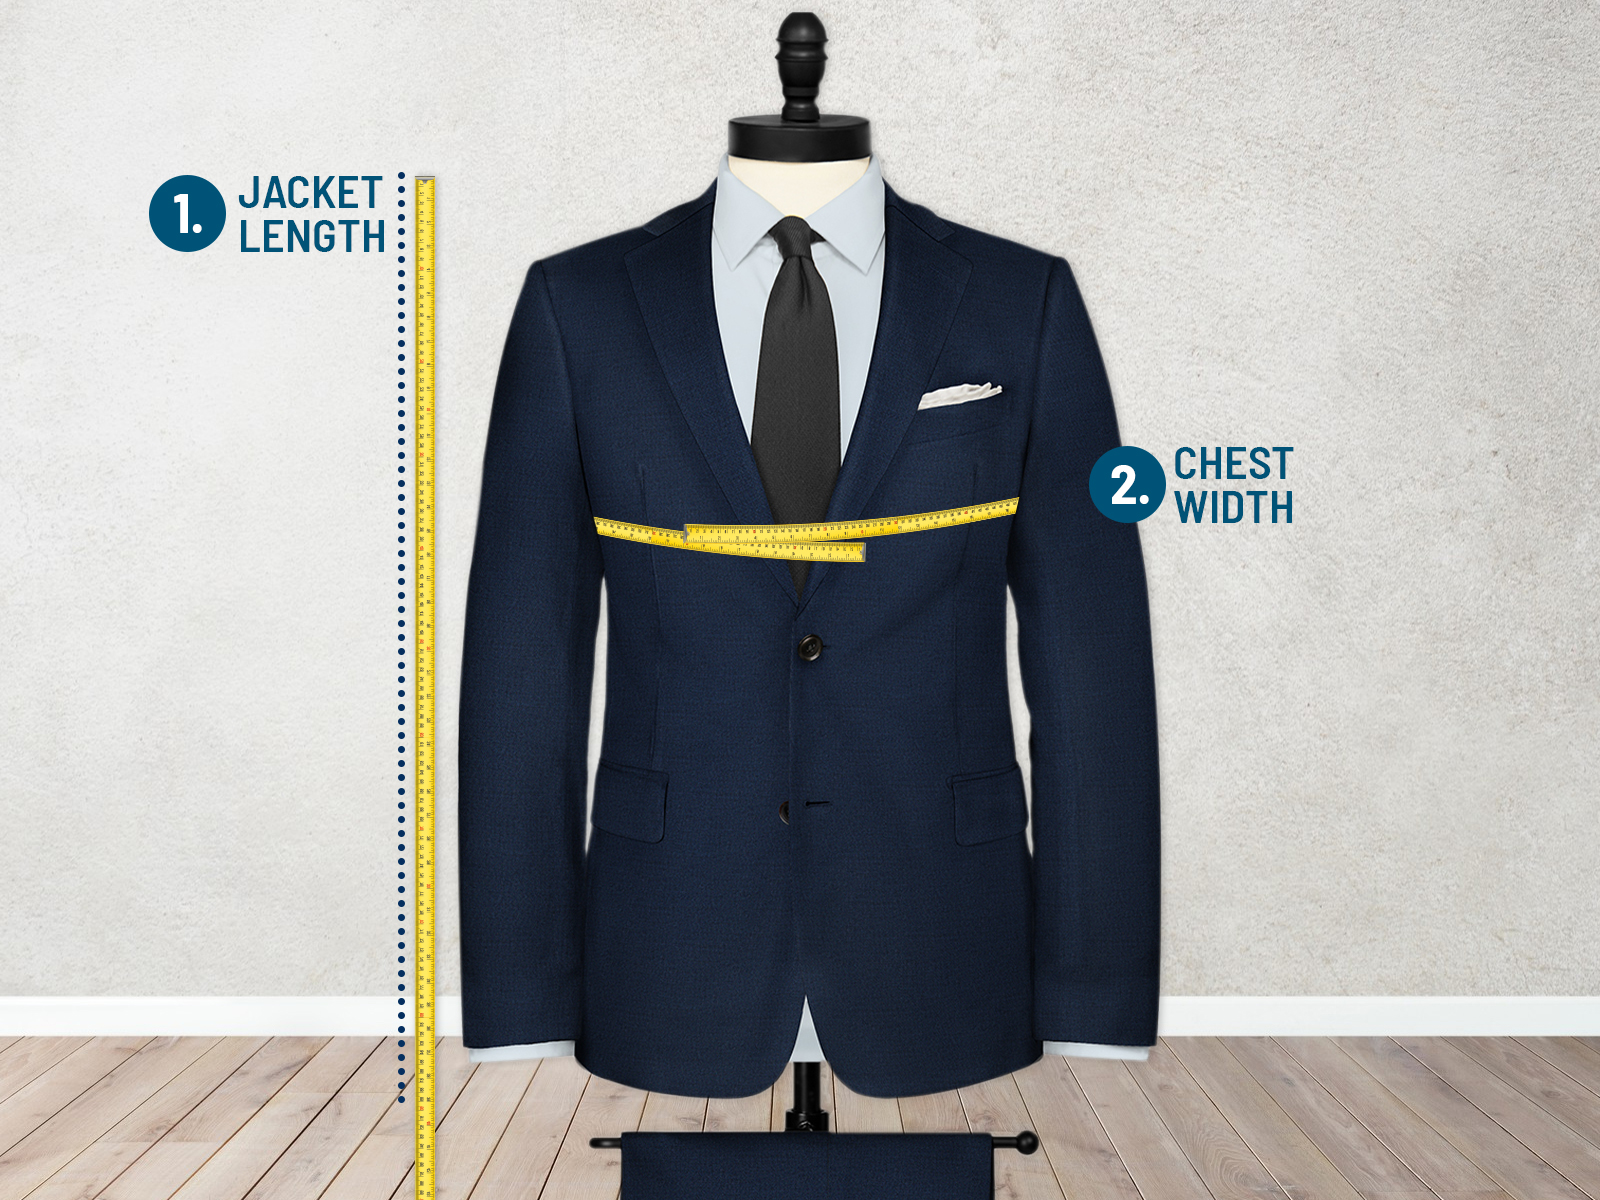 Suit jackets are sized by jacket length and chest width